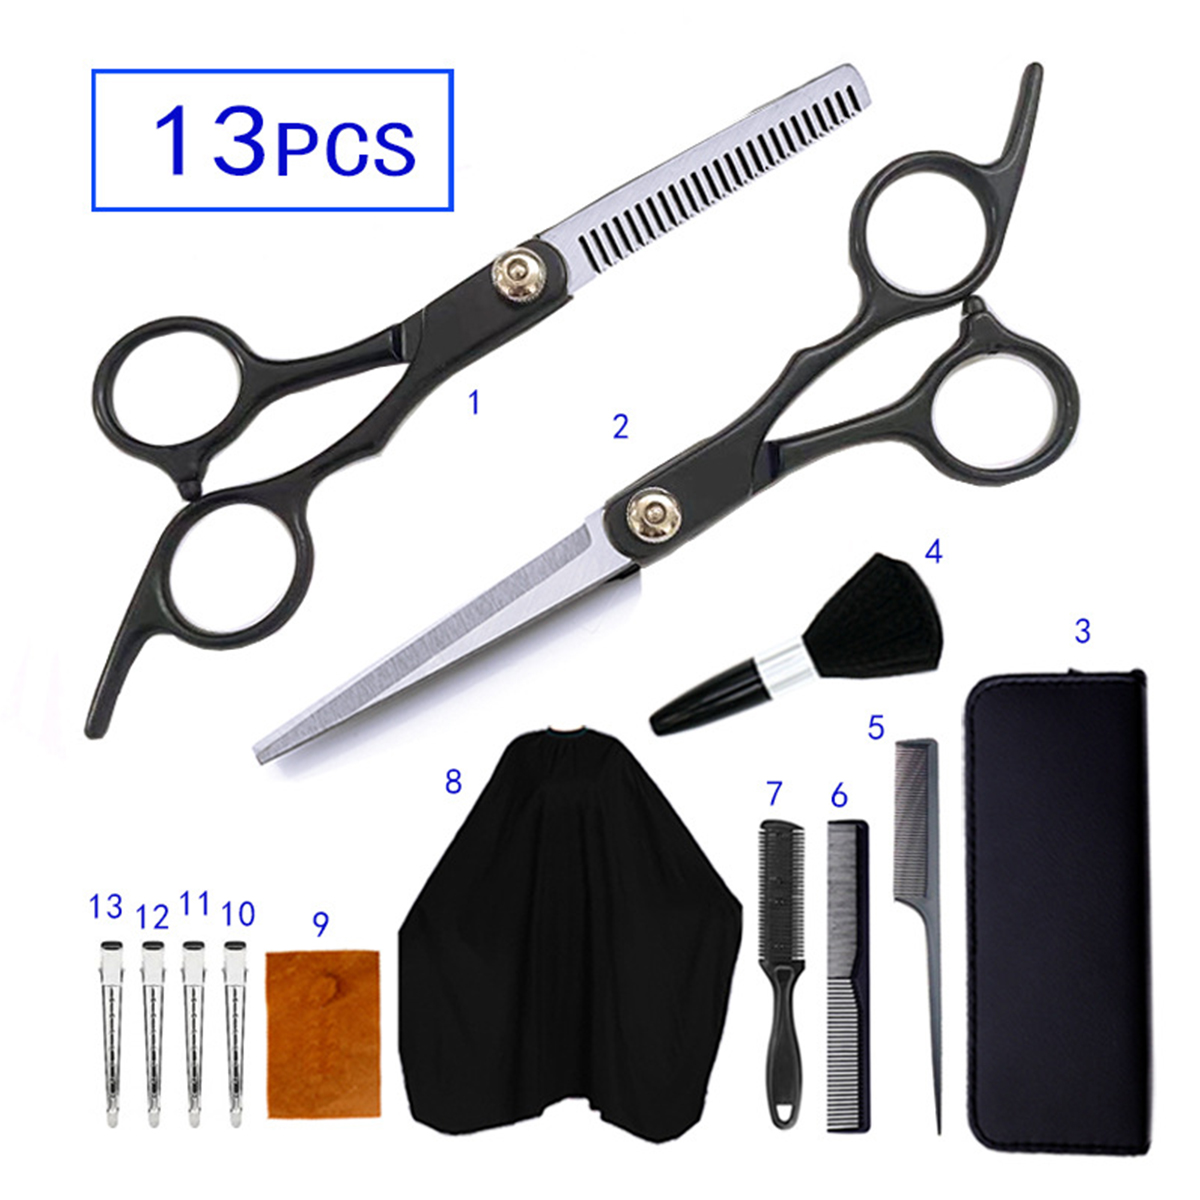 13Pcs-Stainless-Steel-Hairdressing-Shears-Set-Professional-Thinning-Scissors-For-BarberSalonHomeMenW-1906111-1